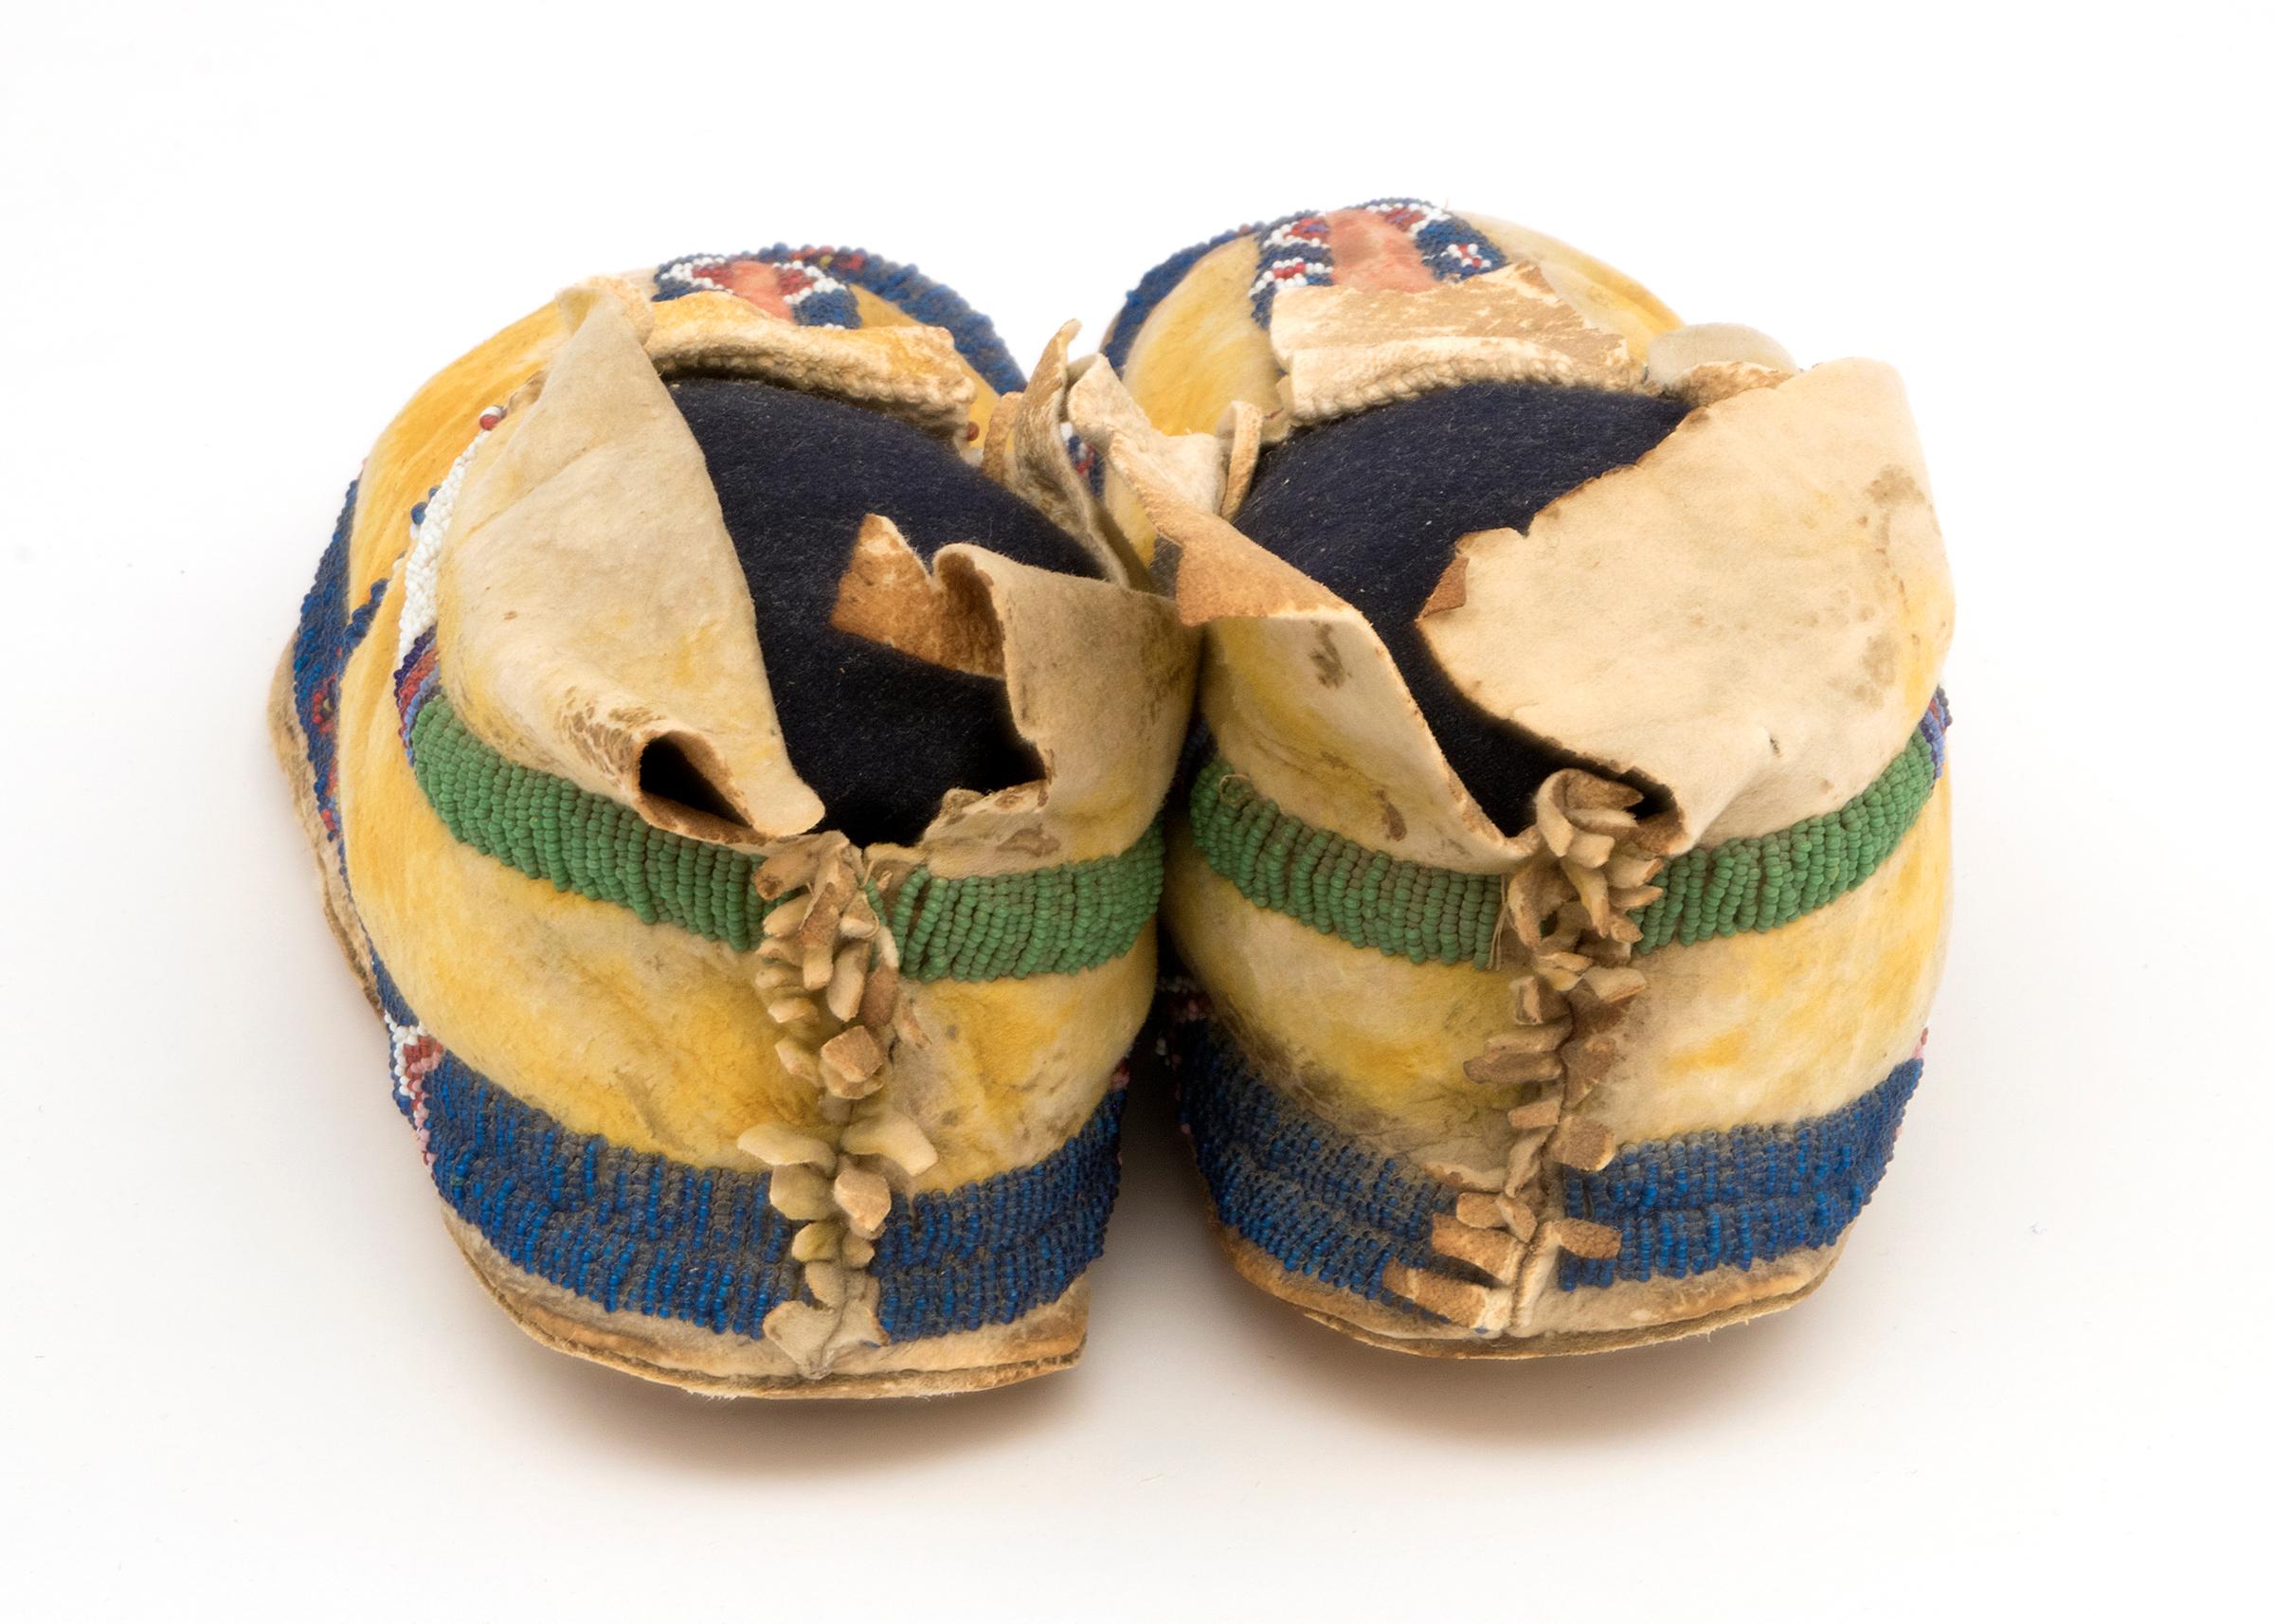 Native American 1880s Transitional Cheyenne Plains Moccasins with Dye and Beaded Elements